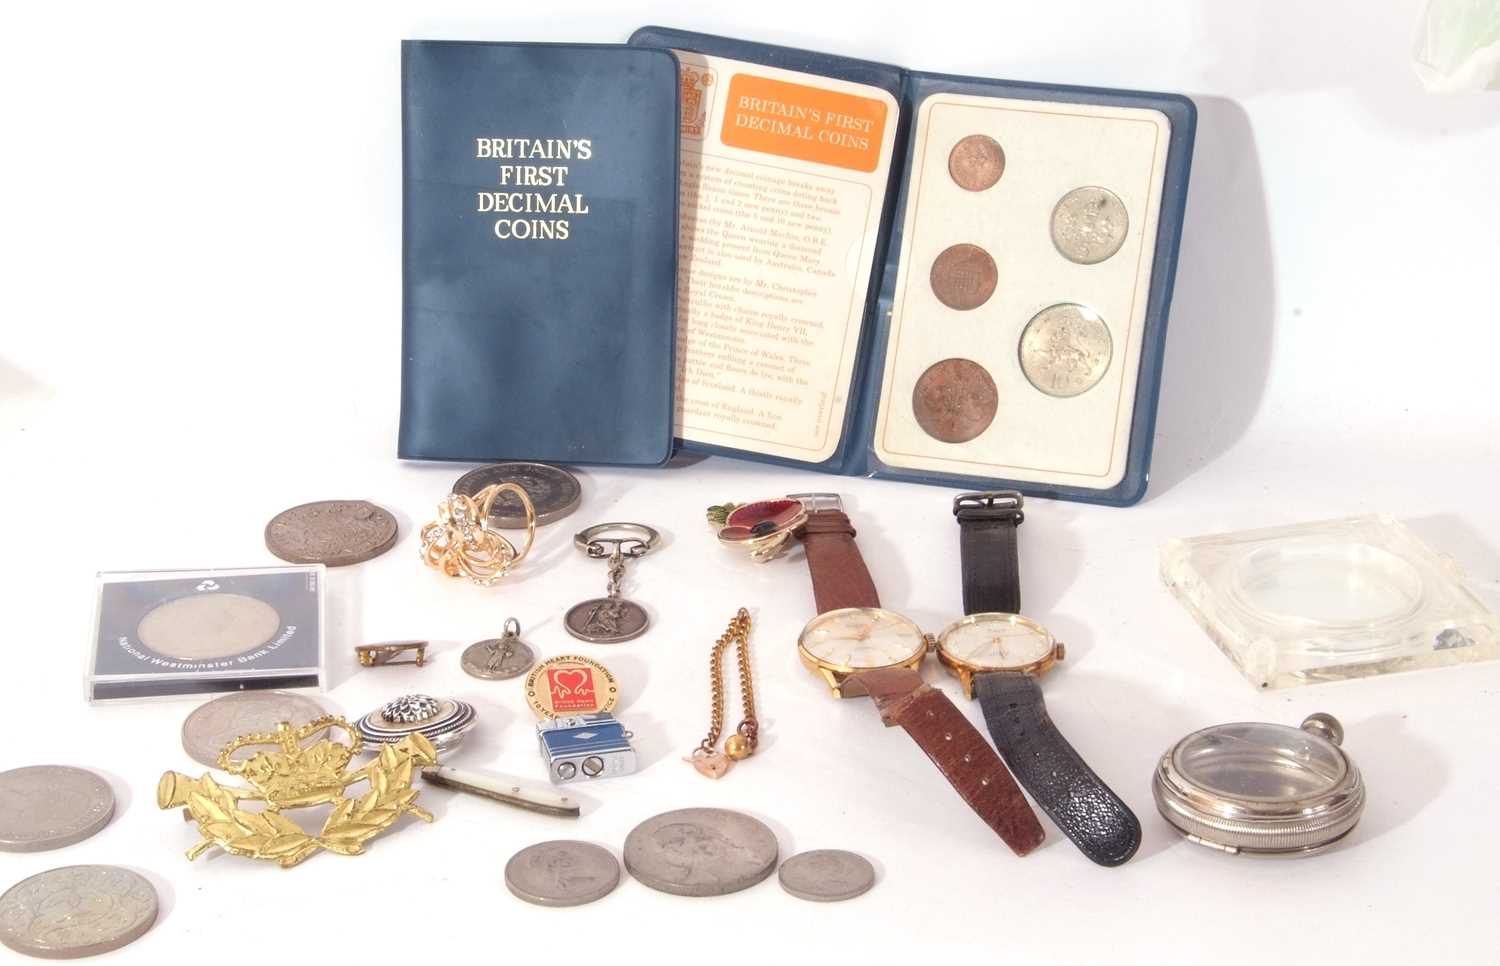 Mixed Lot to include two gents wrist watches, a Regency and Aviva example, a metal pocket watch case